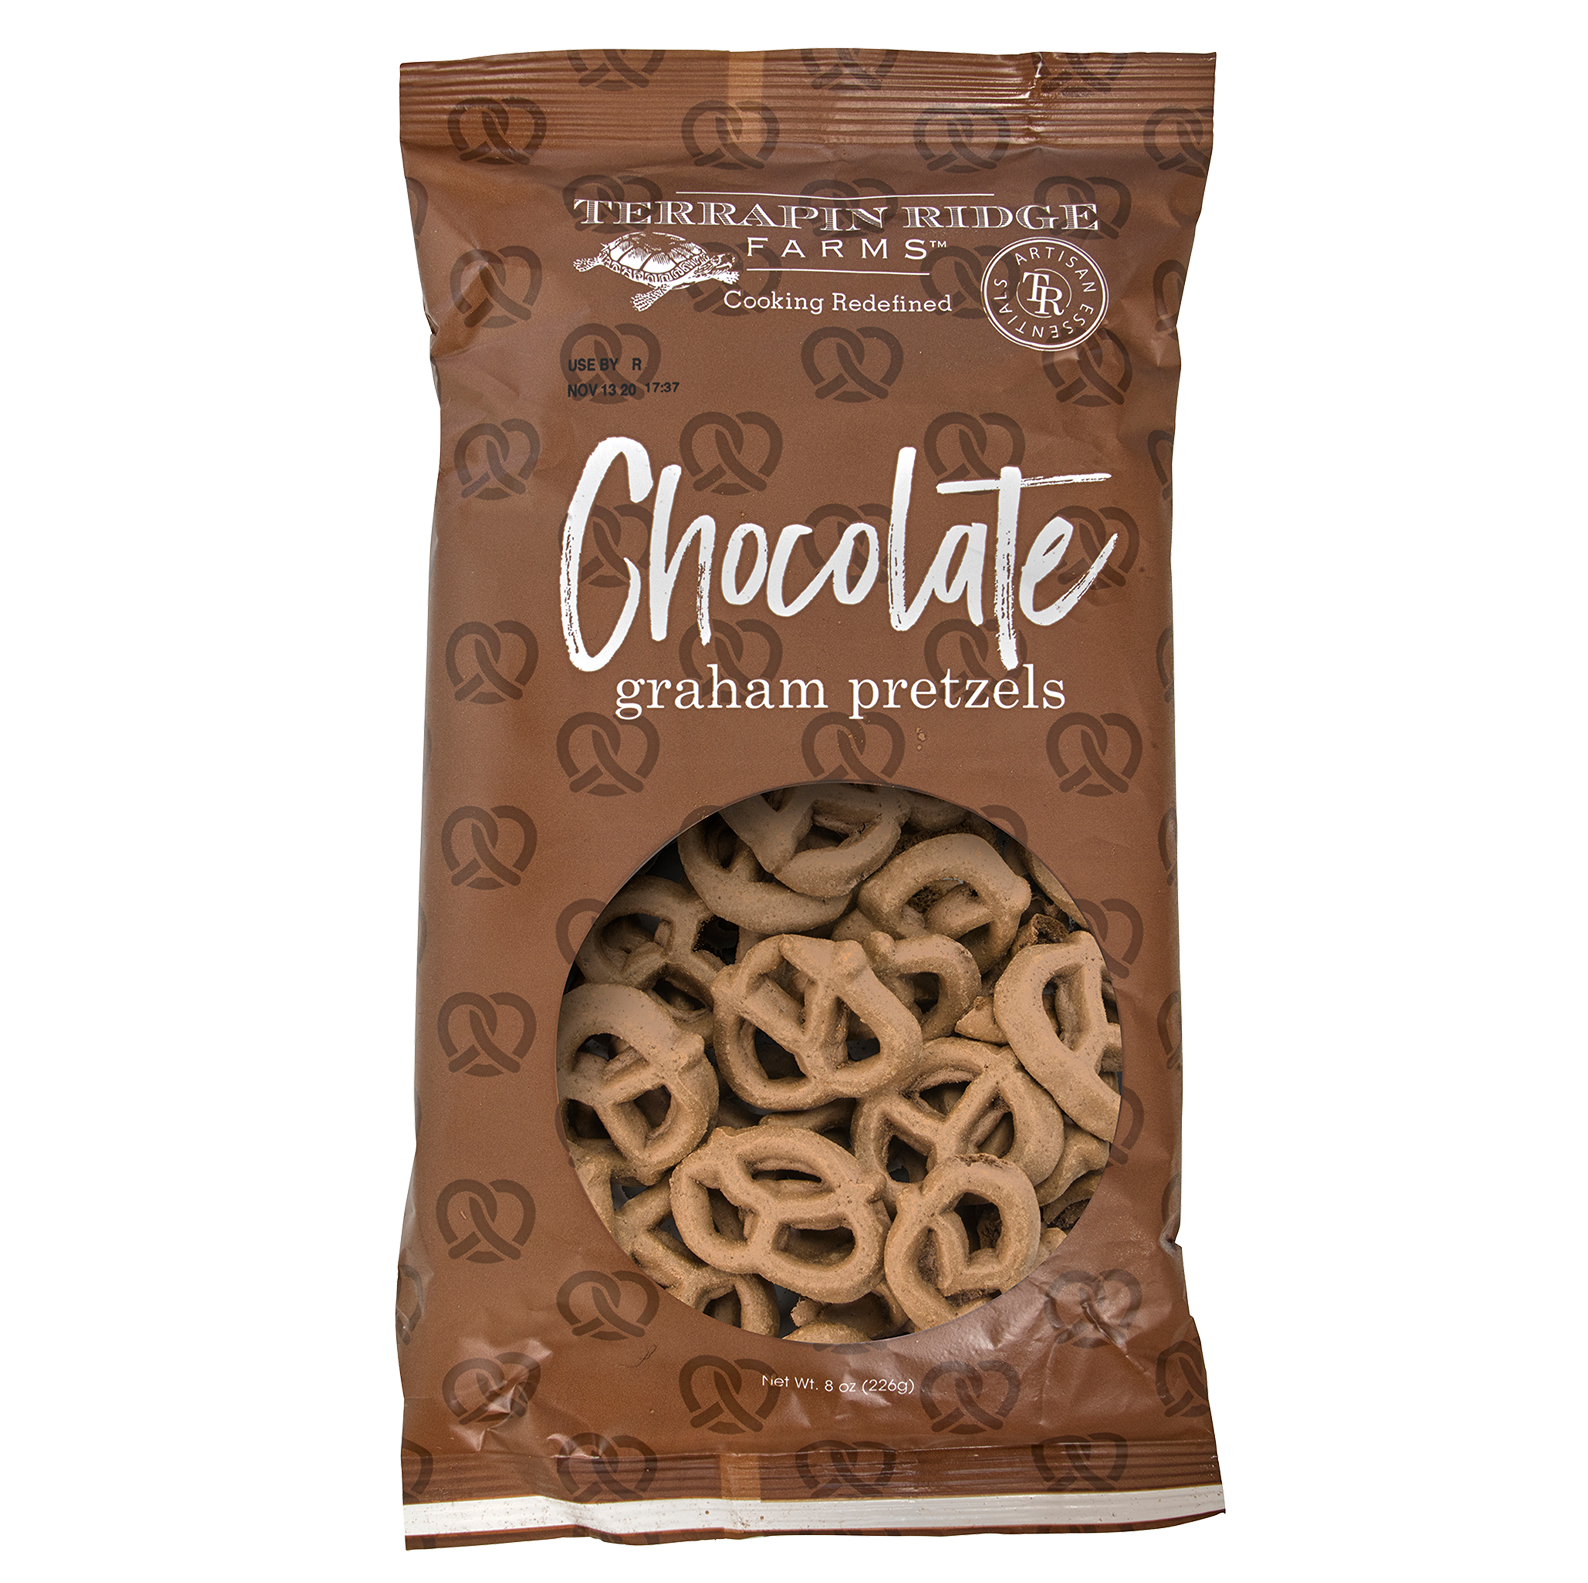 bag of chocolate pretzels on a white background.